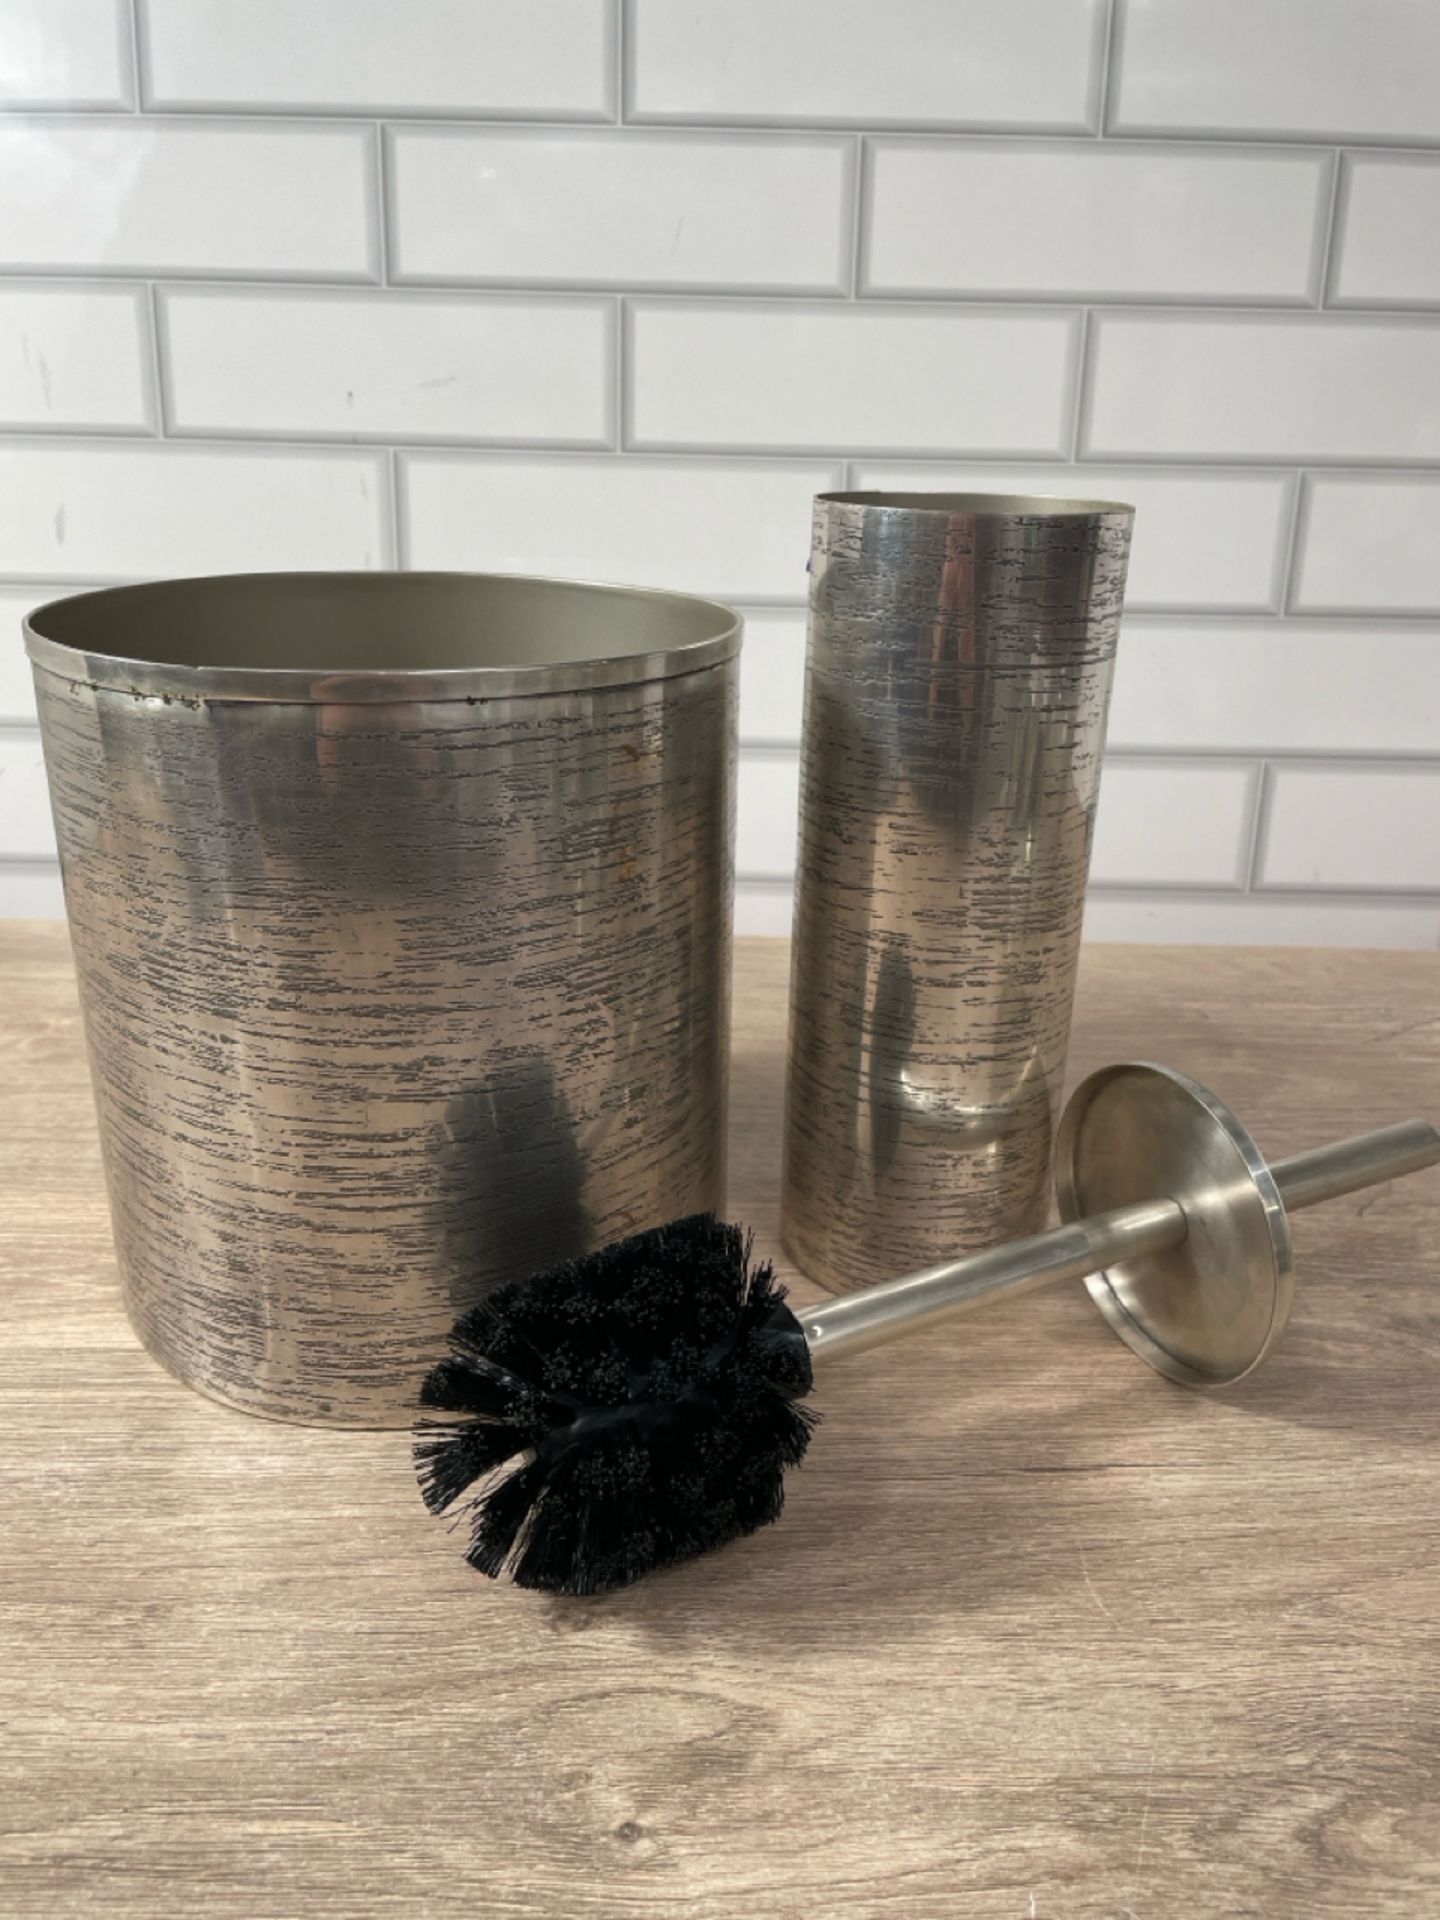 Etched Steel Bathroom Accessories - Image 2 of 4